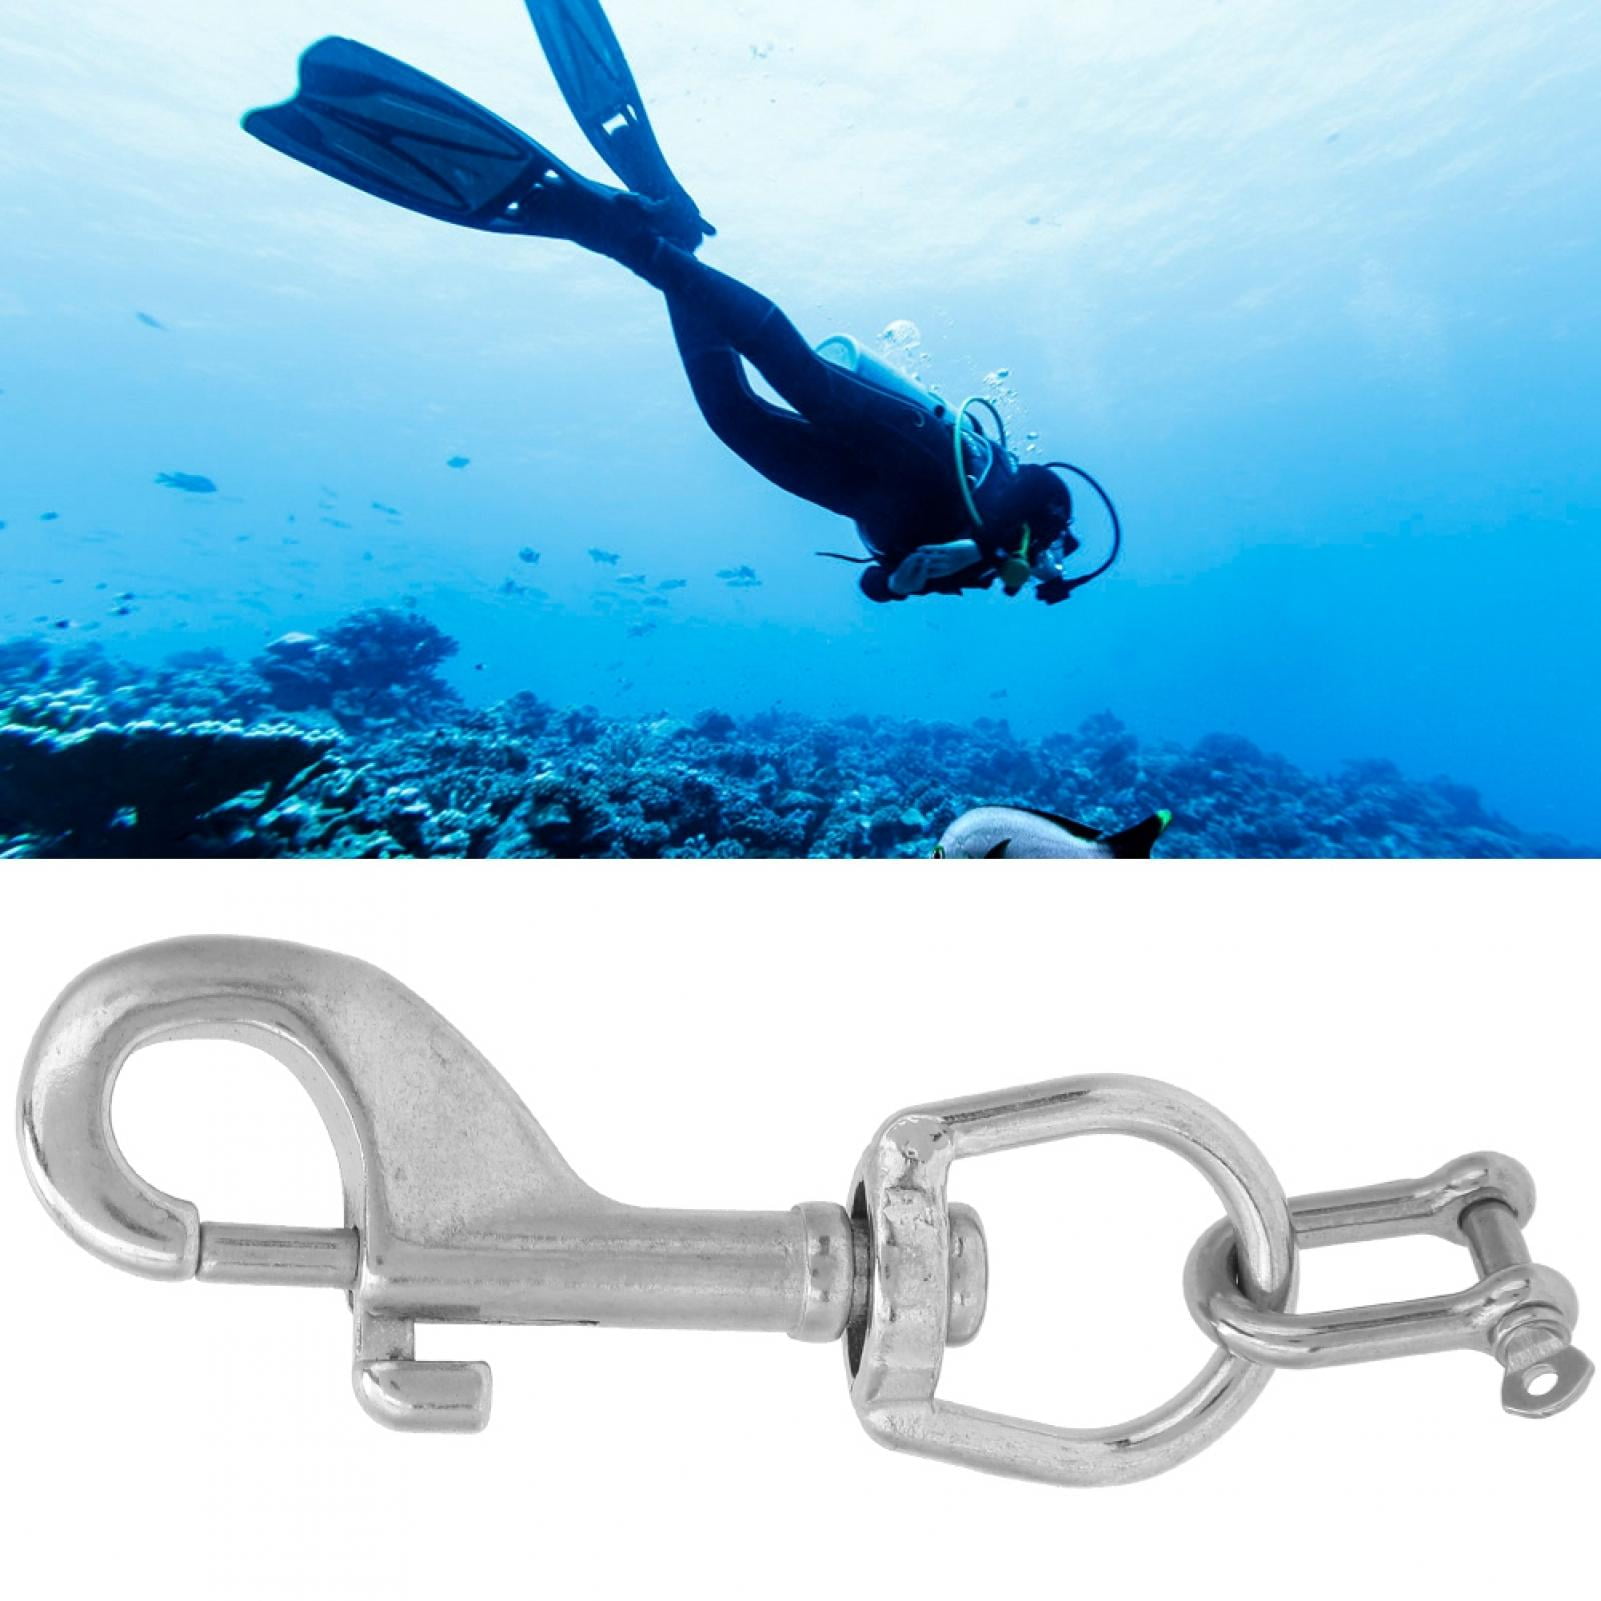 Details about   57g Corrosion Resistance Single End Snap Diving Single End Snap For Underwater 